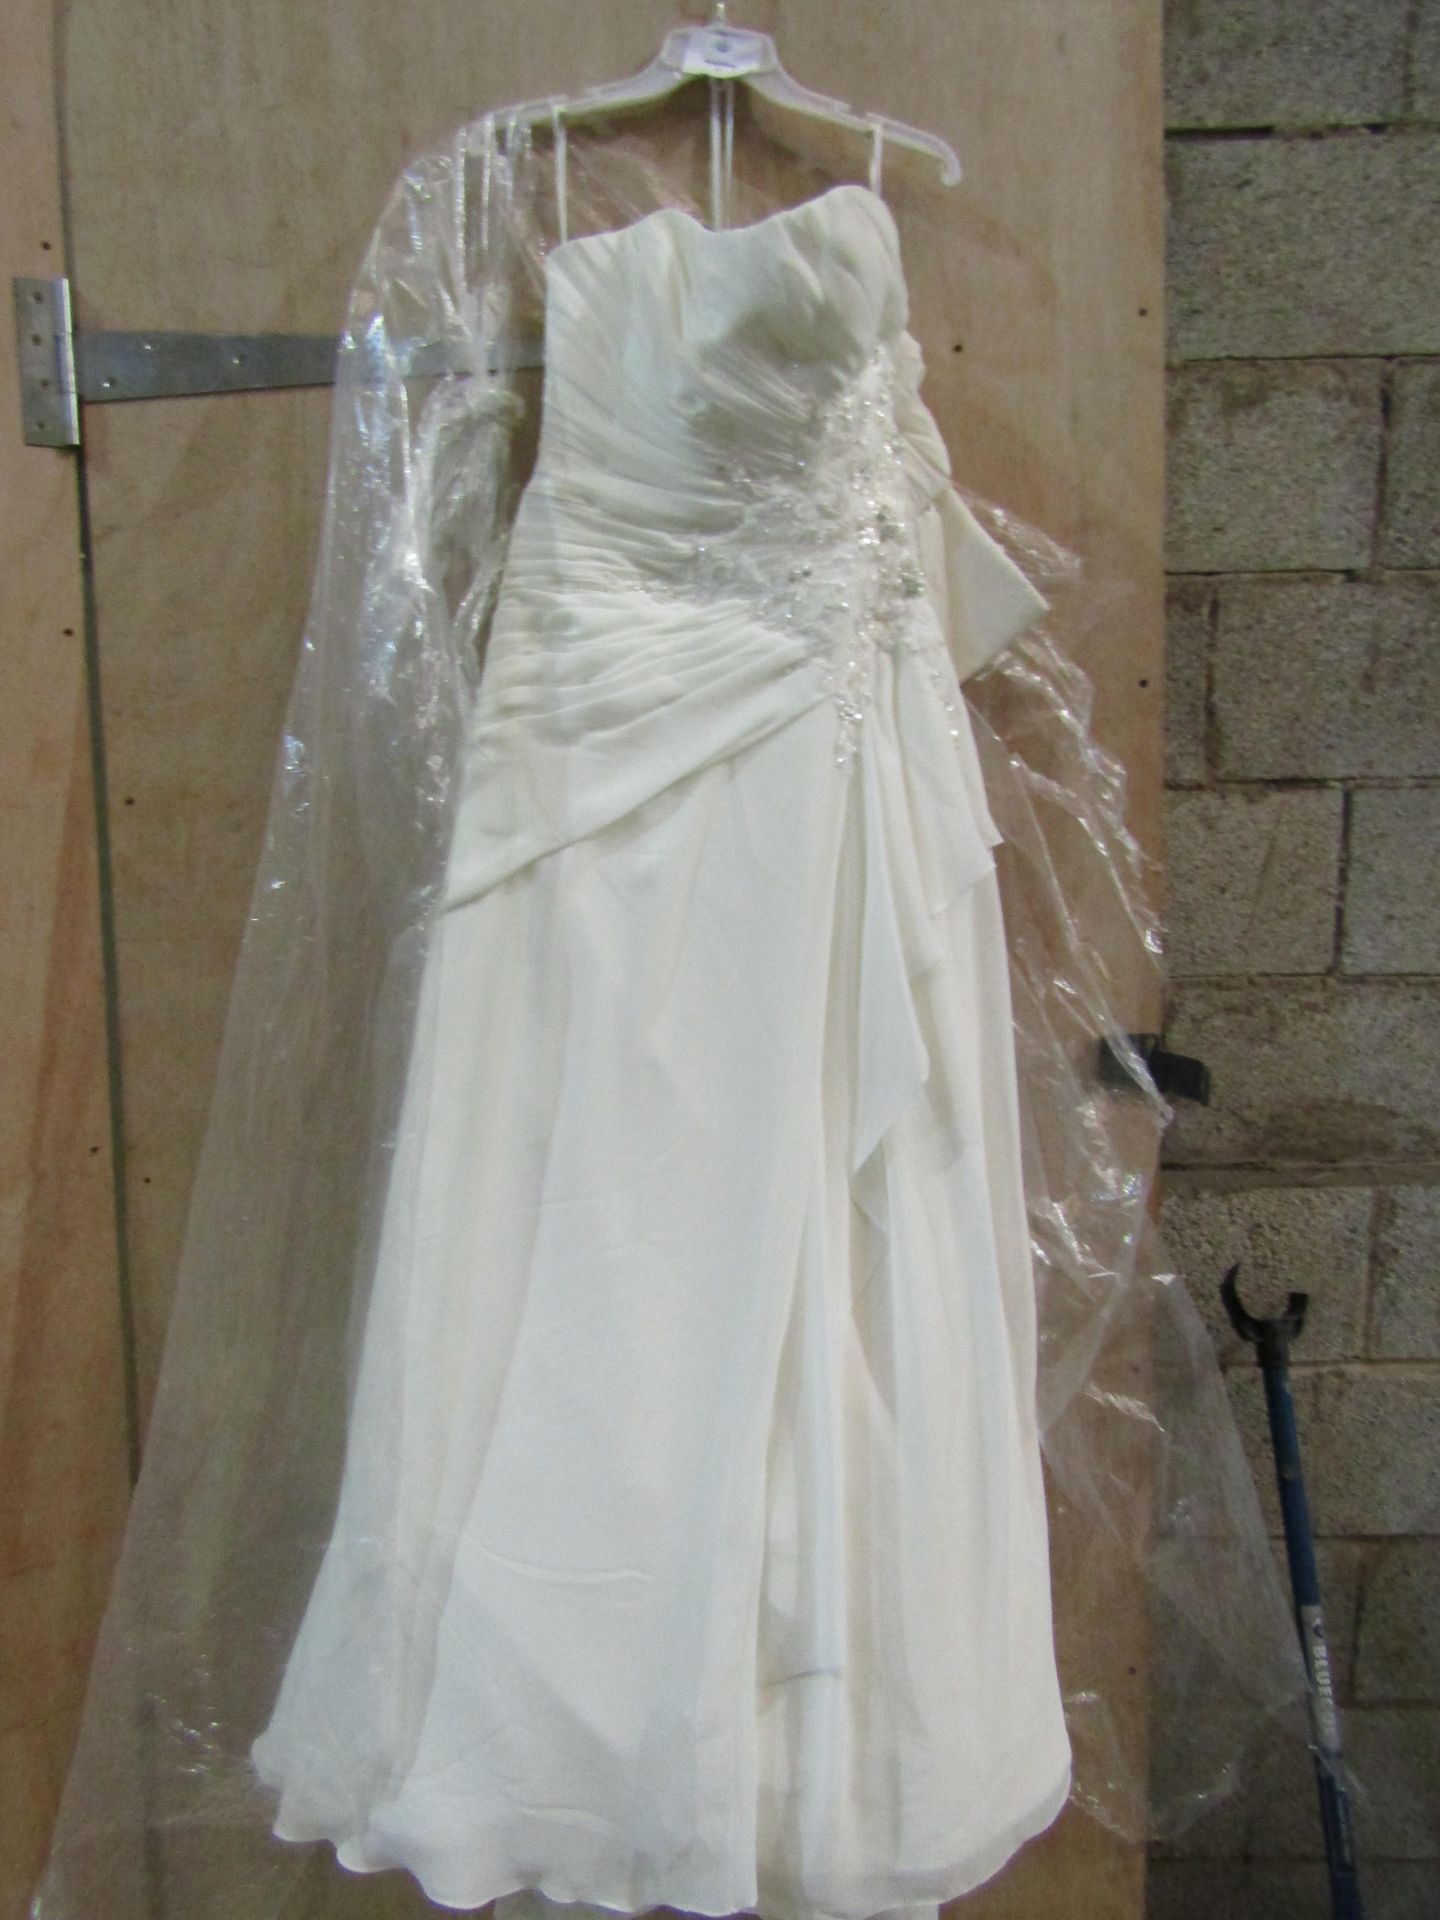 Approx 500 pieces of wedding shop stock to include wedding dresses, mother of the bride, dresses, - Image 43 of 43